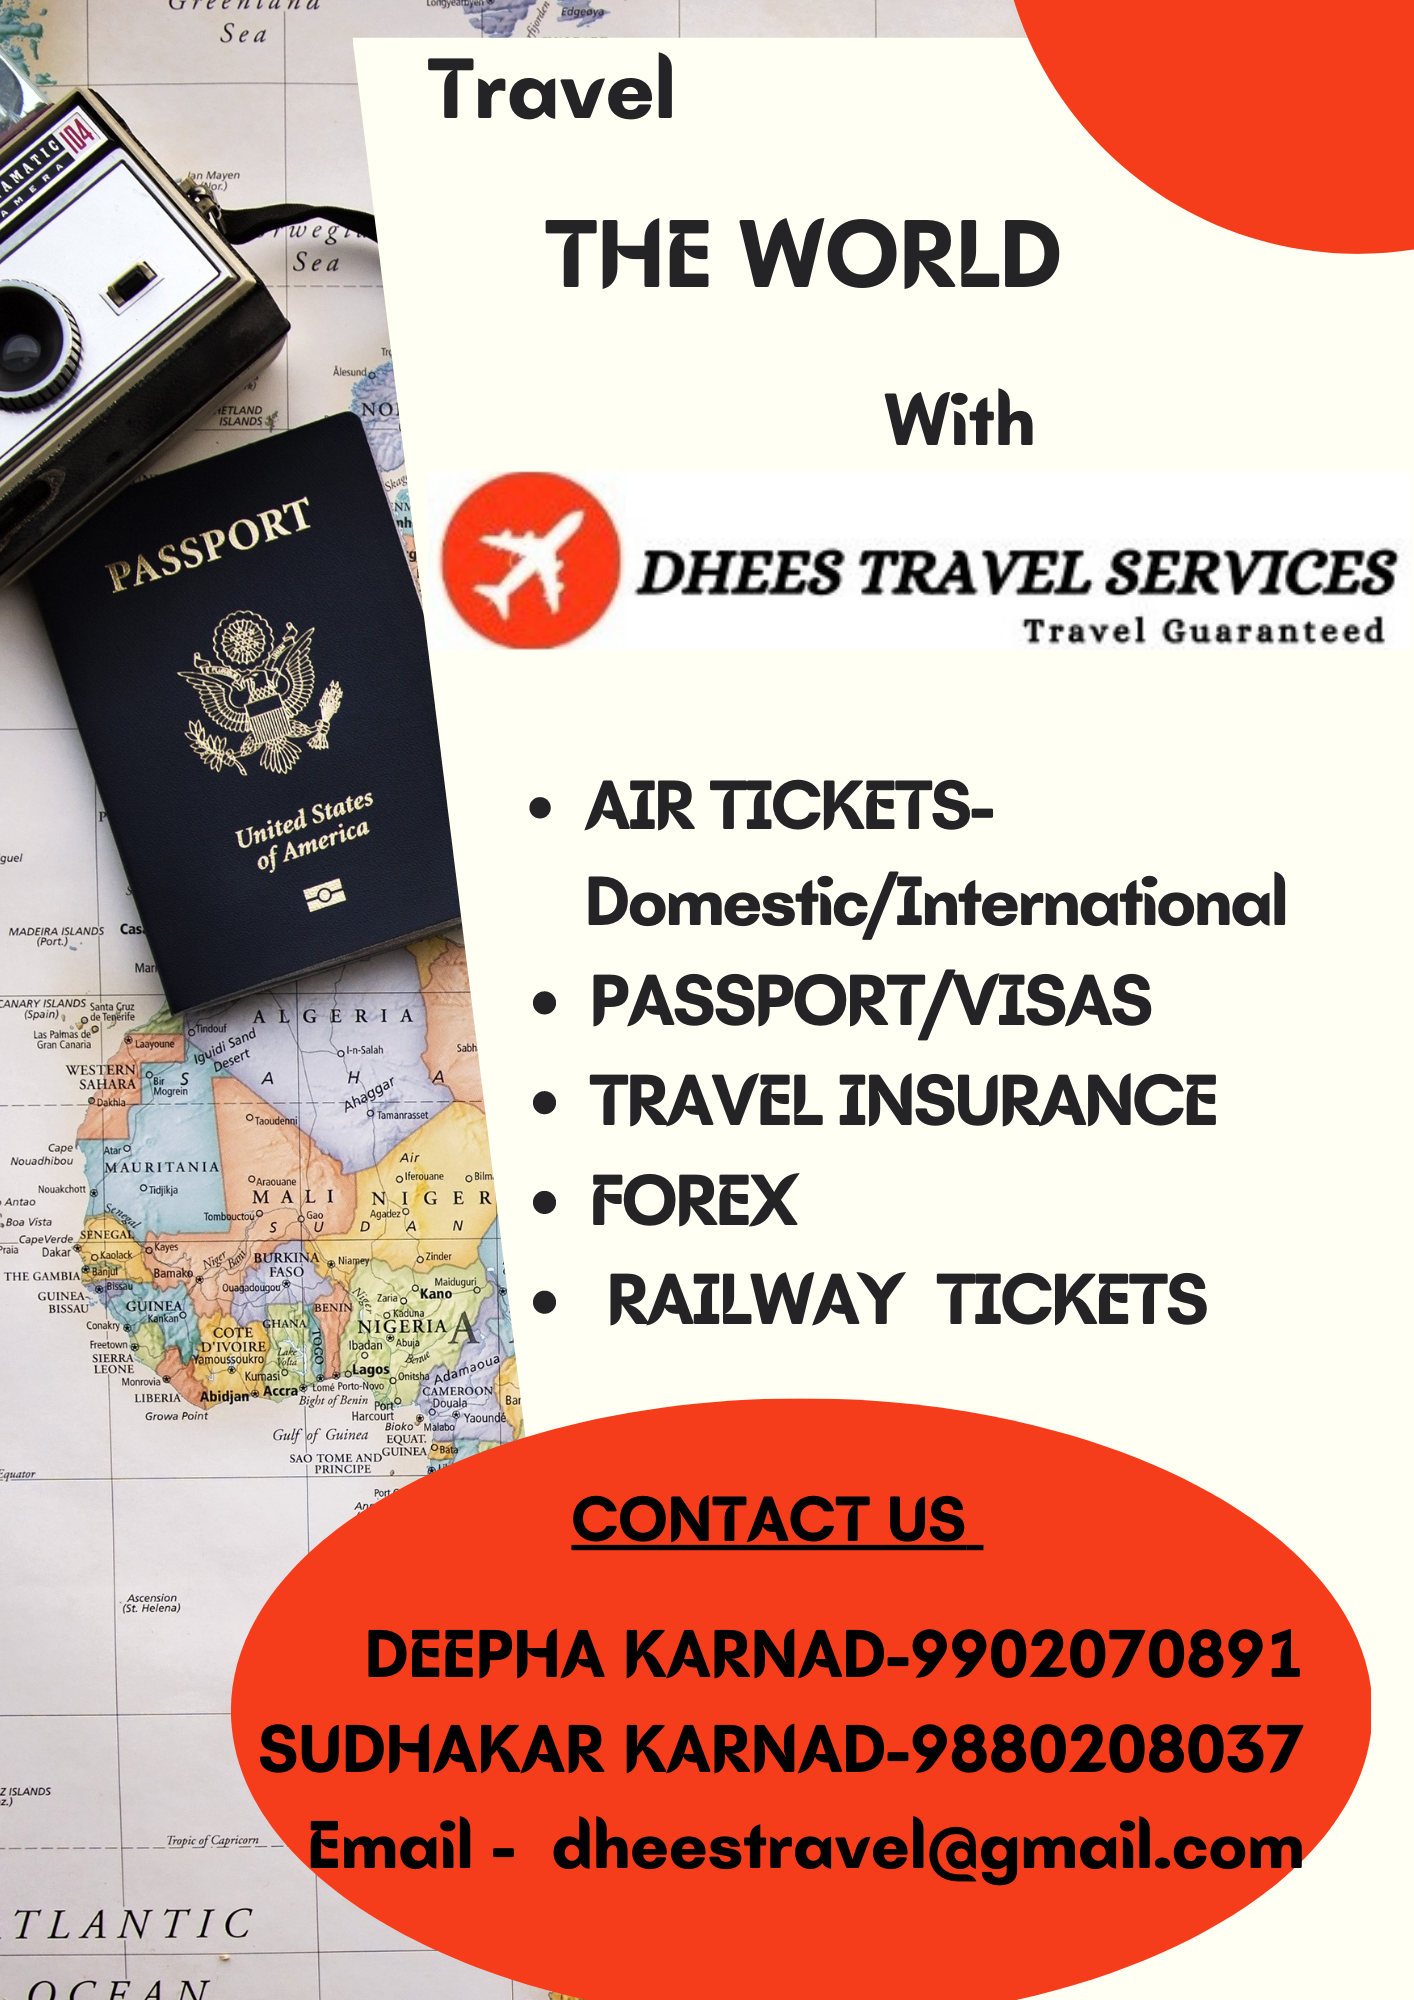 DHEES TRAVEL SERVICES